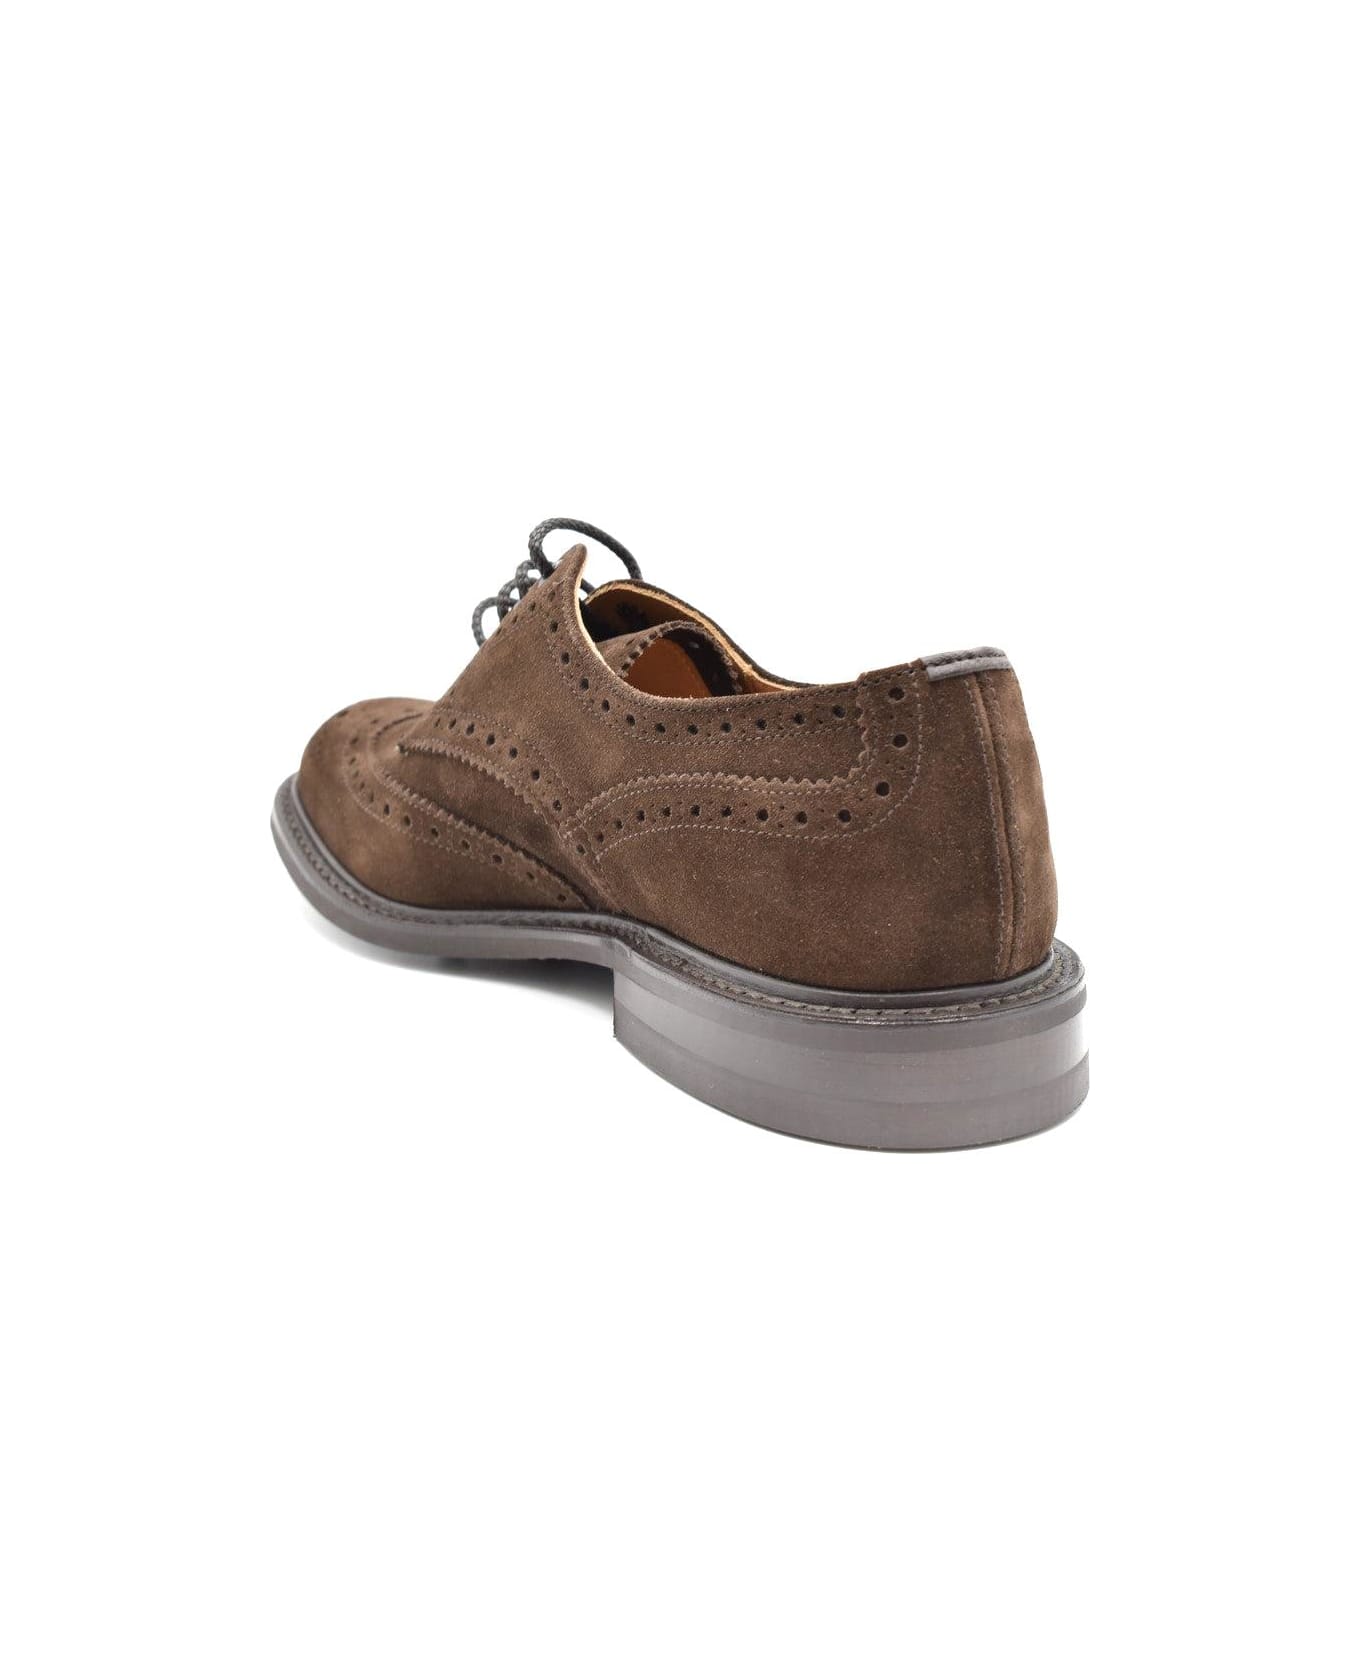 Tricker's Bourton Country Shoes